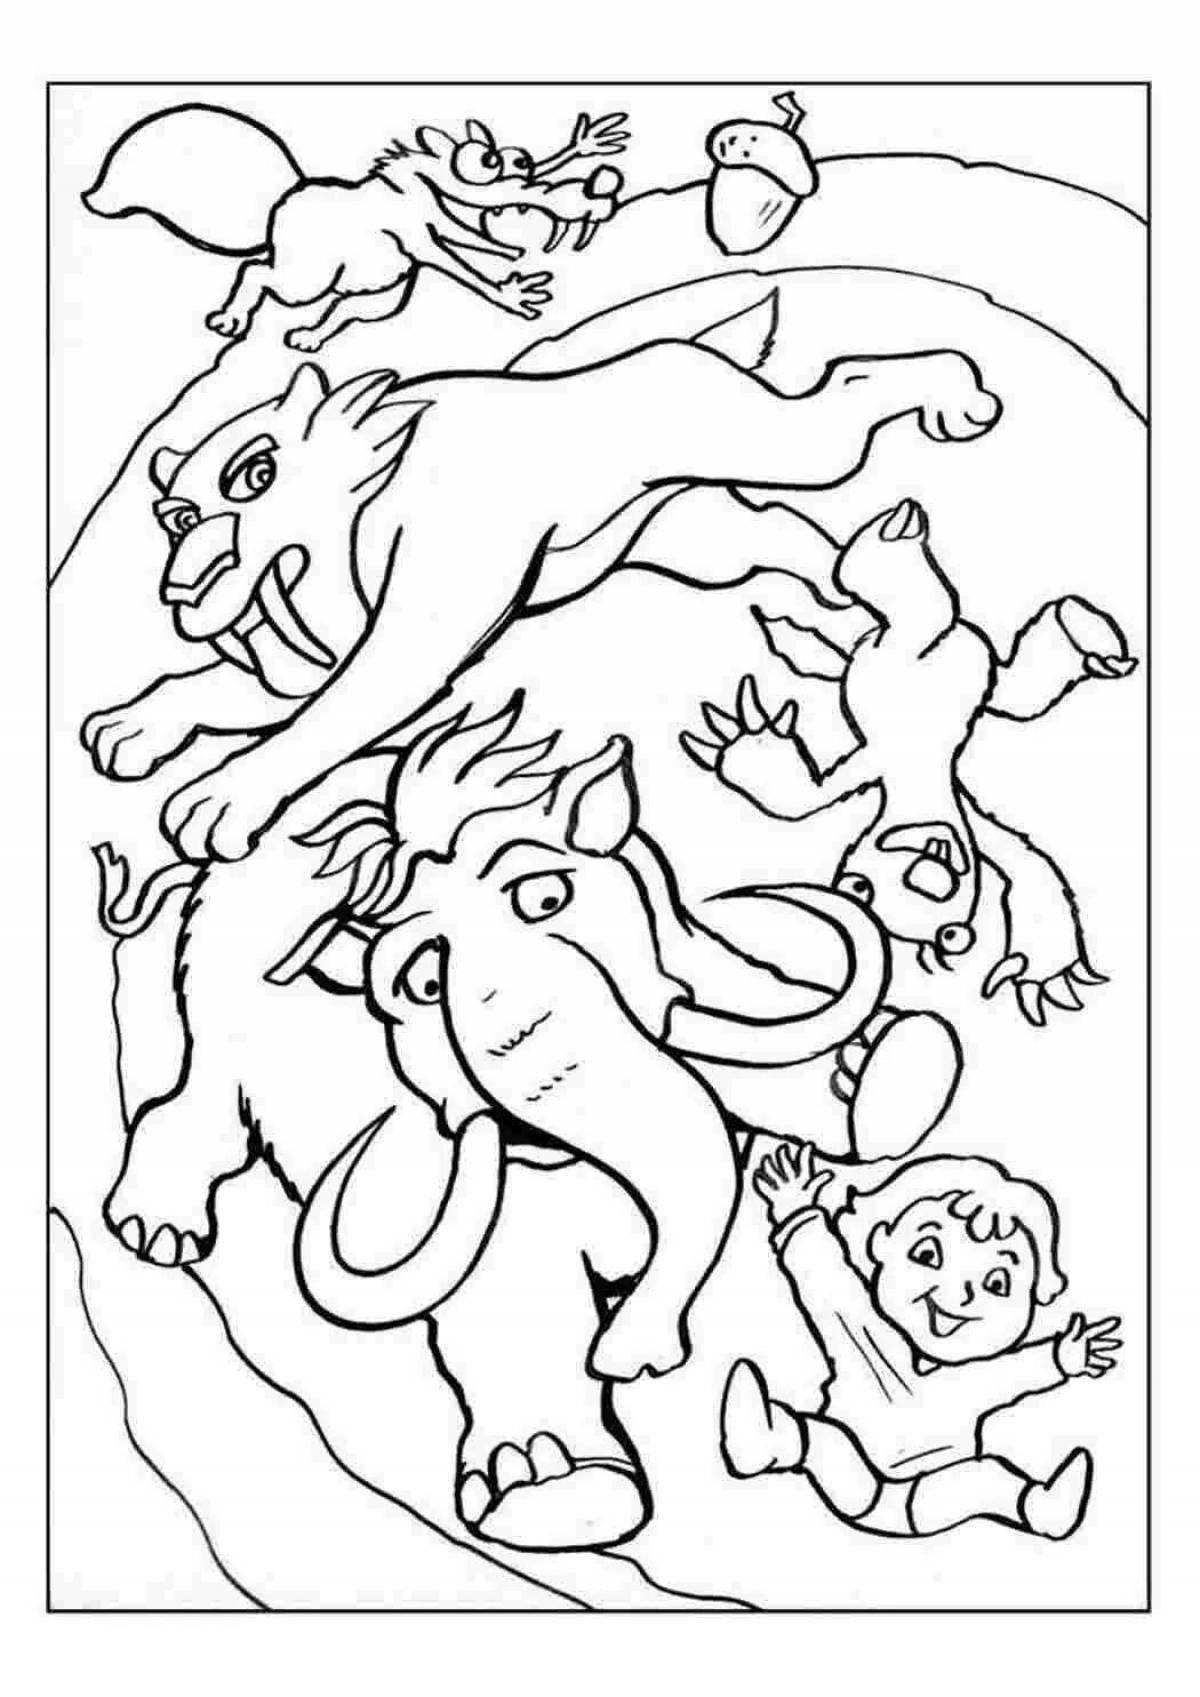 Funny diego ice age coloring book